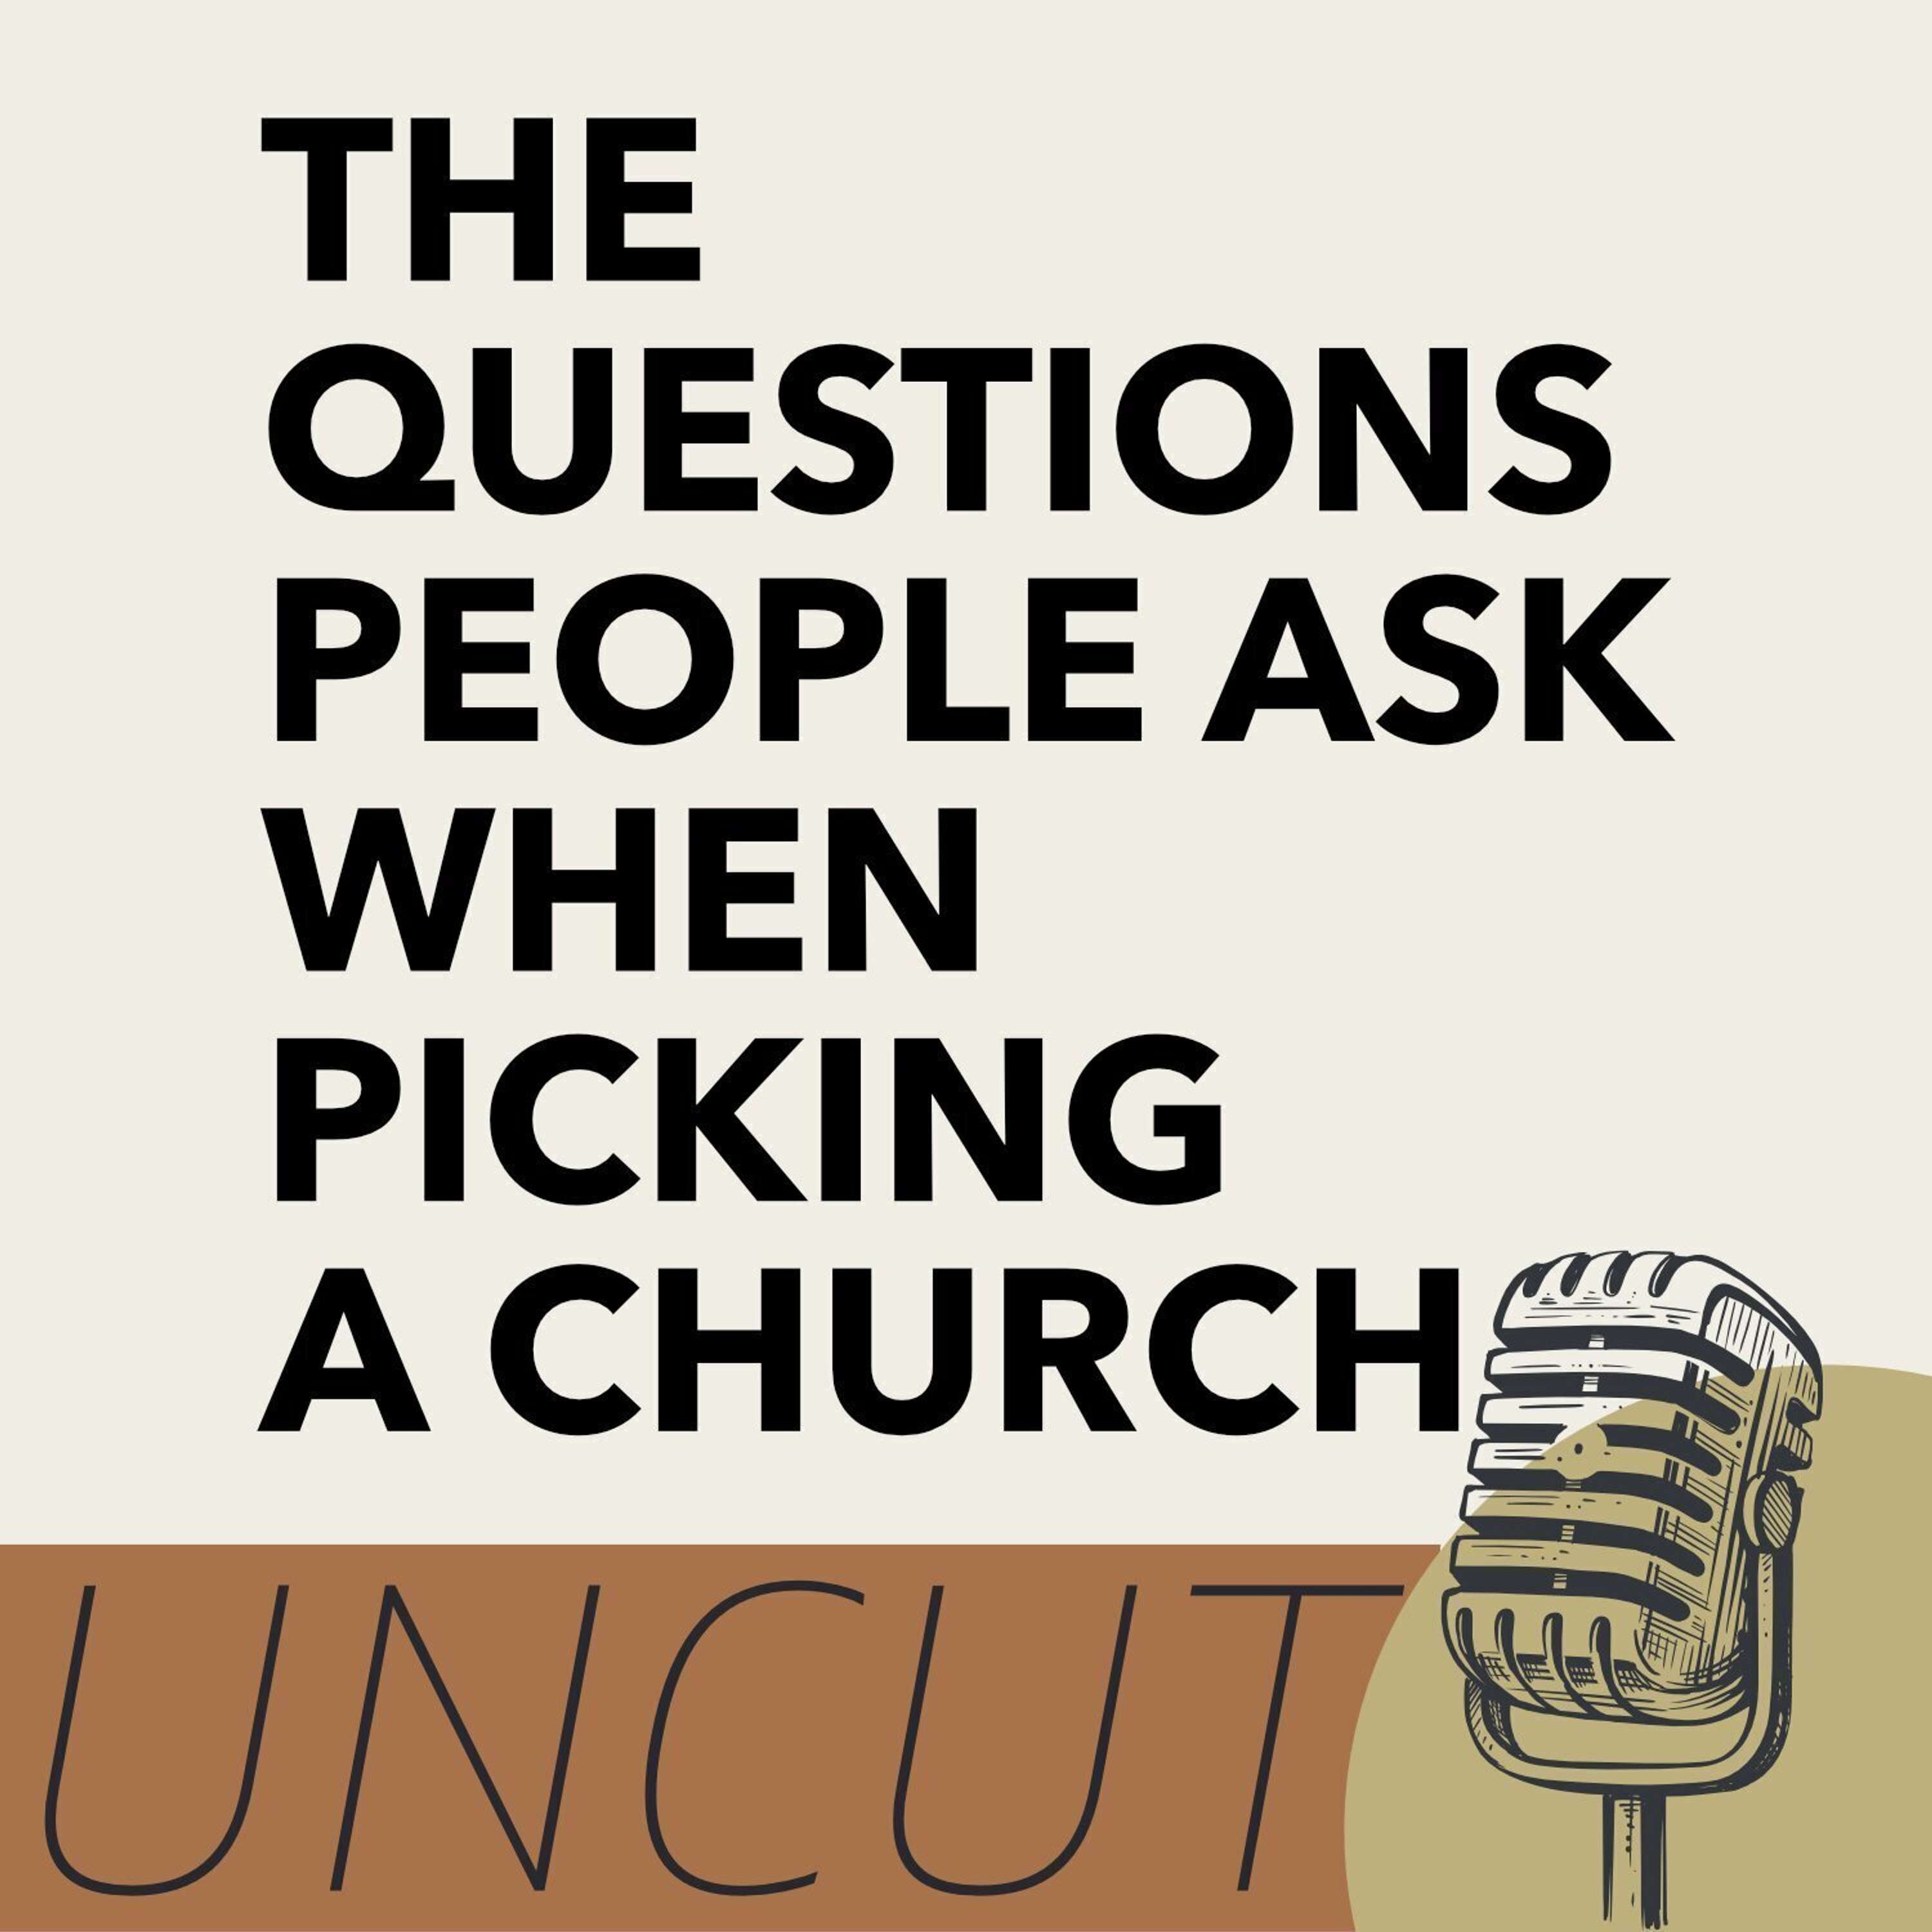 What People Ask When Picking a Church